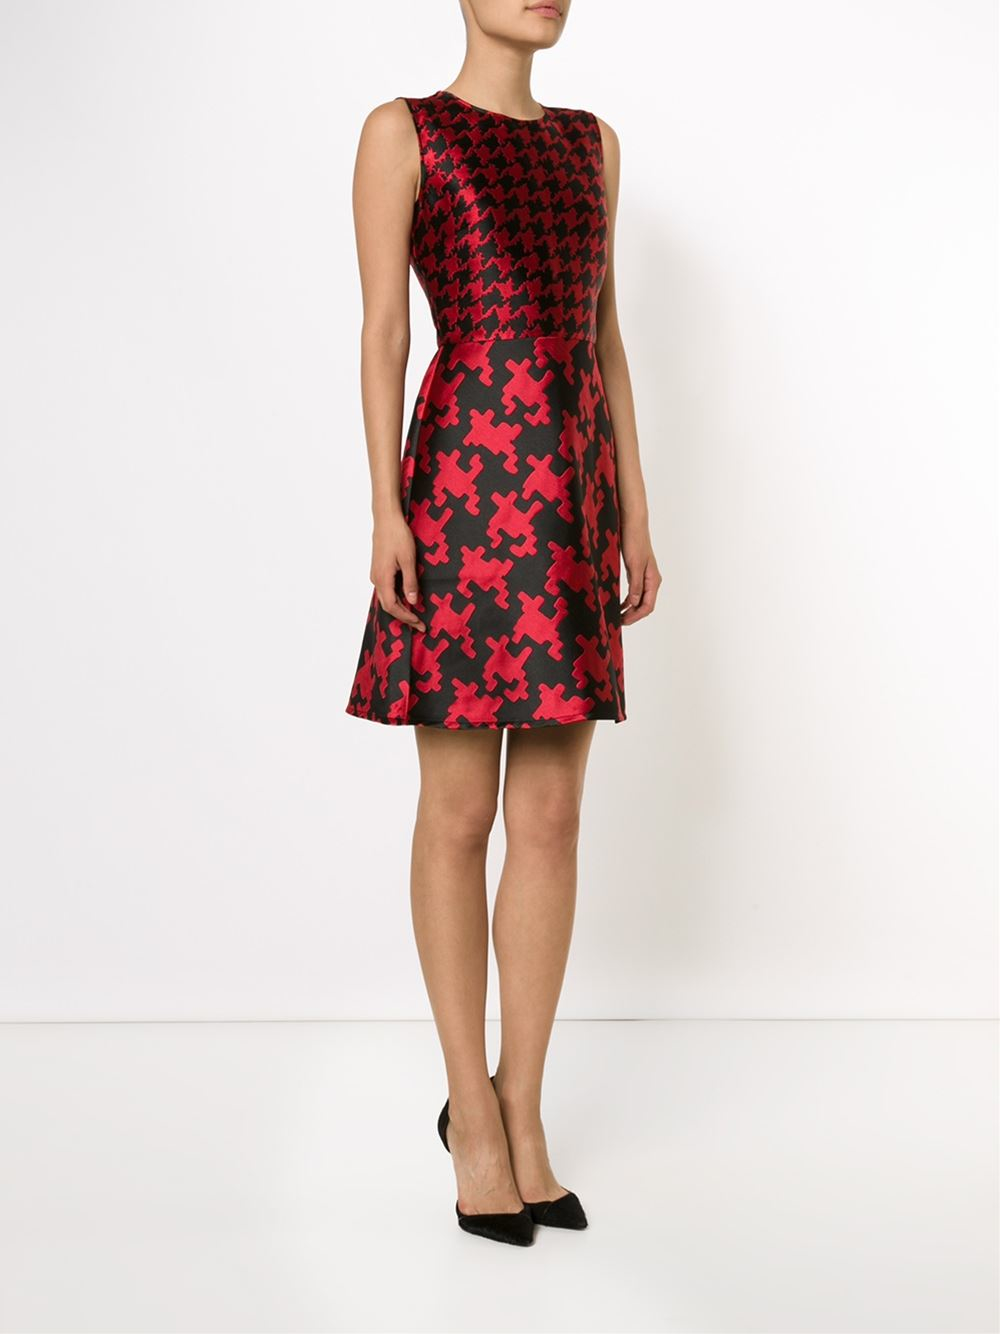 Boutique moschino Houndstooth Jacquard Dress in Beige (RED) - Save 30% ...